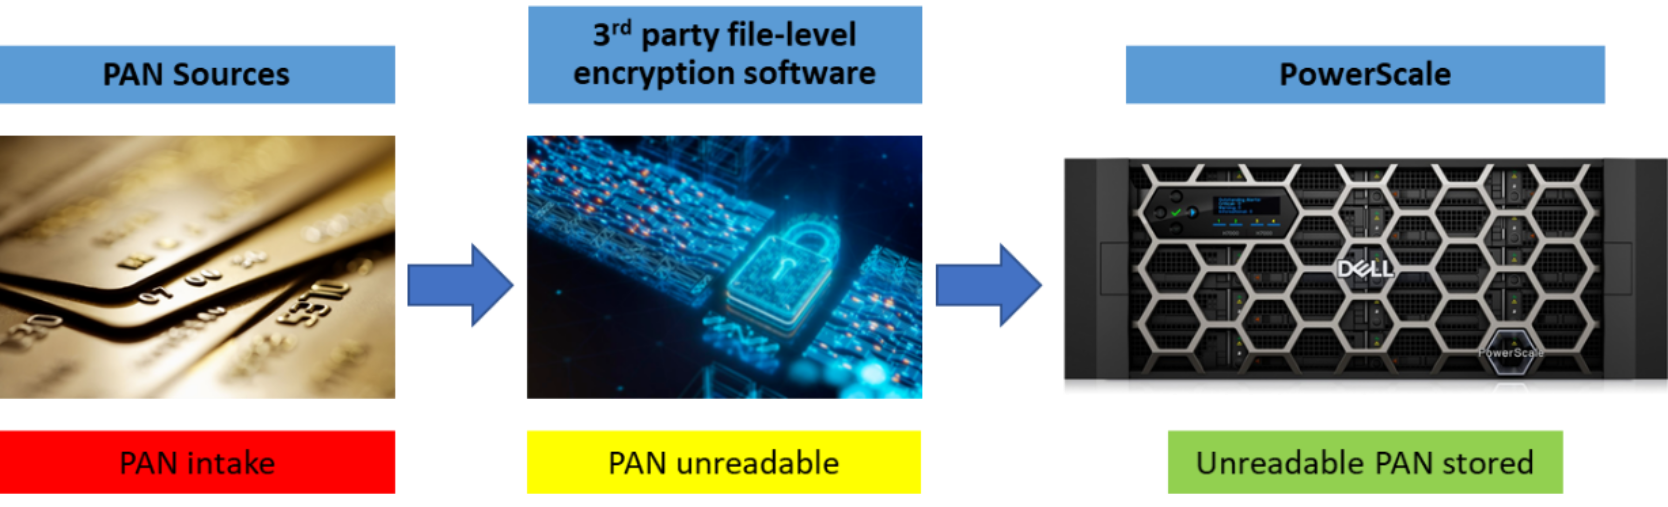 A figure illustrating the file-level encryption workflow.